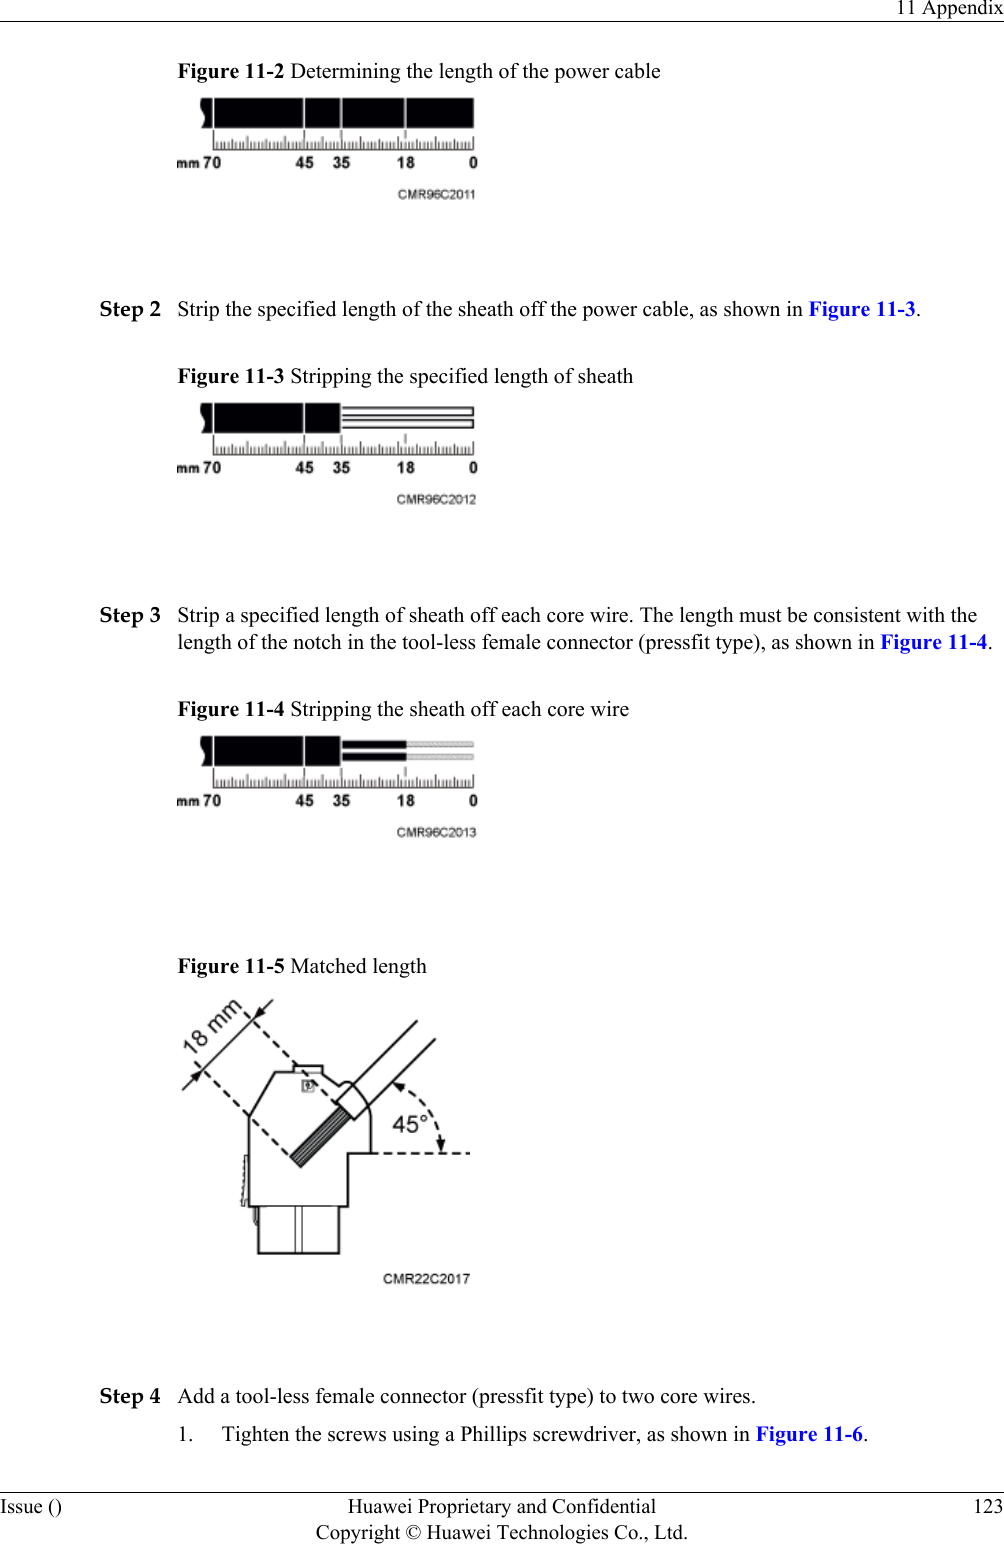 Figure 11-2 Determining the length of the power cable Step 2 Strip the specified length of the sheath off the power cable, as shown in Figure 11-3.Figure 11-3 Stripping the specified length of sheath Step 3 Strip a specified length of sheath off each core wire. The length must be consistent with thelength of the notch in the tool-less female connector (pressfit type), as shown in Figure 11-4.Figure 11-4 Stripping the sheath off each core wire Figure 11-5 Matched length Step 4 Add a tool-less female connector (pressfit type) to two core wires.1. Tighten the screws using a Phillips screwdriver, as shown in Figure 11-6.11 AppendixIssue () Huawei Proprietary and ConfidentialCopyright © Huawei Technologies Co., Ltd.123